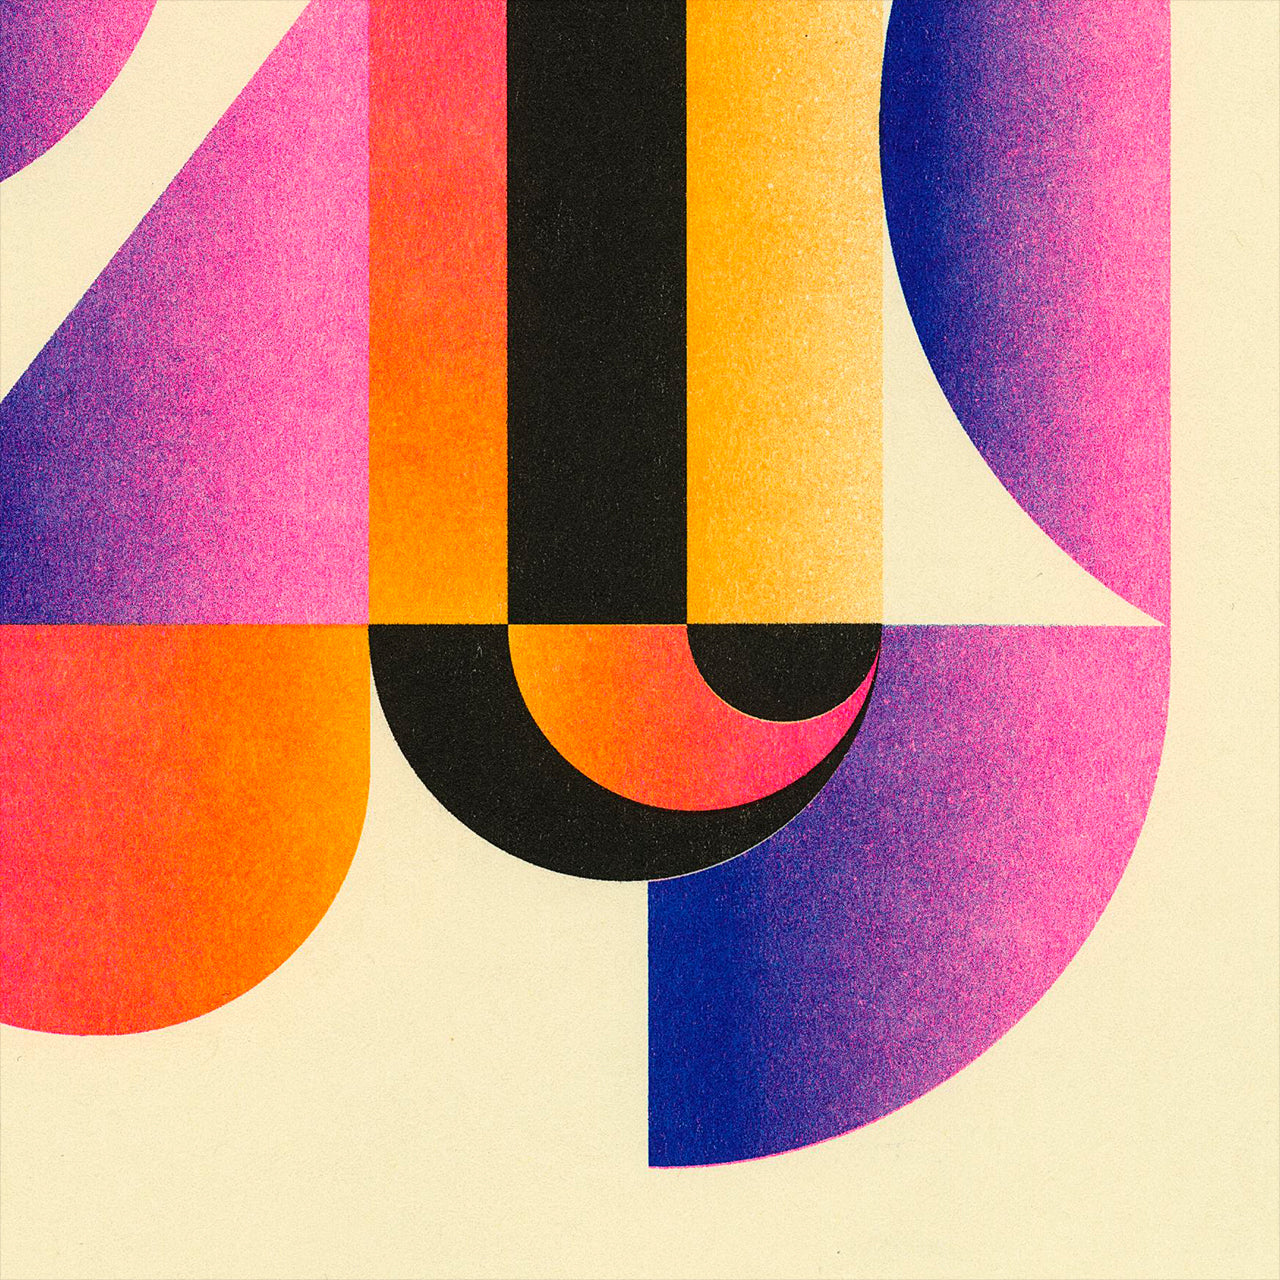 Upclose detail of a Riso print by Jessie and Katey with geometric shapes